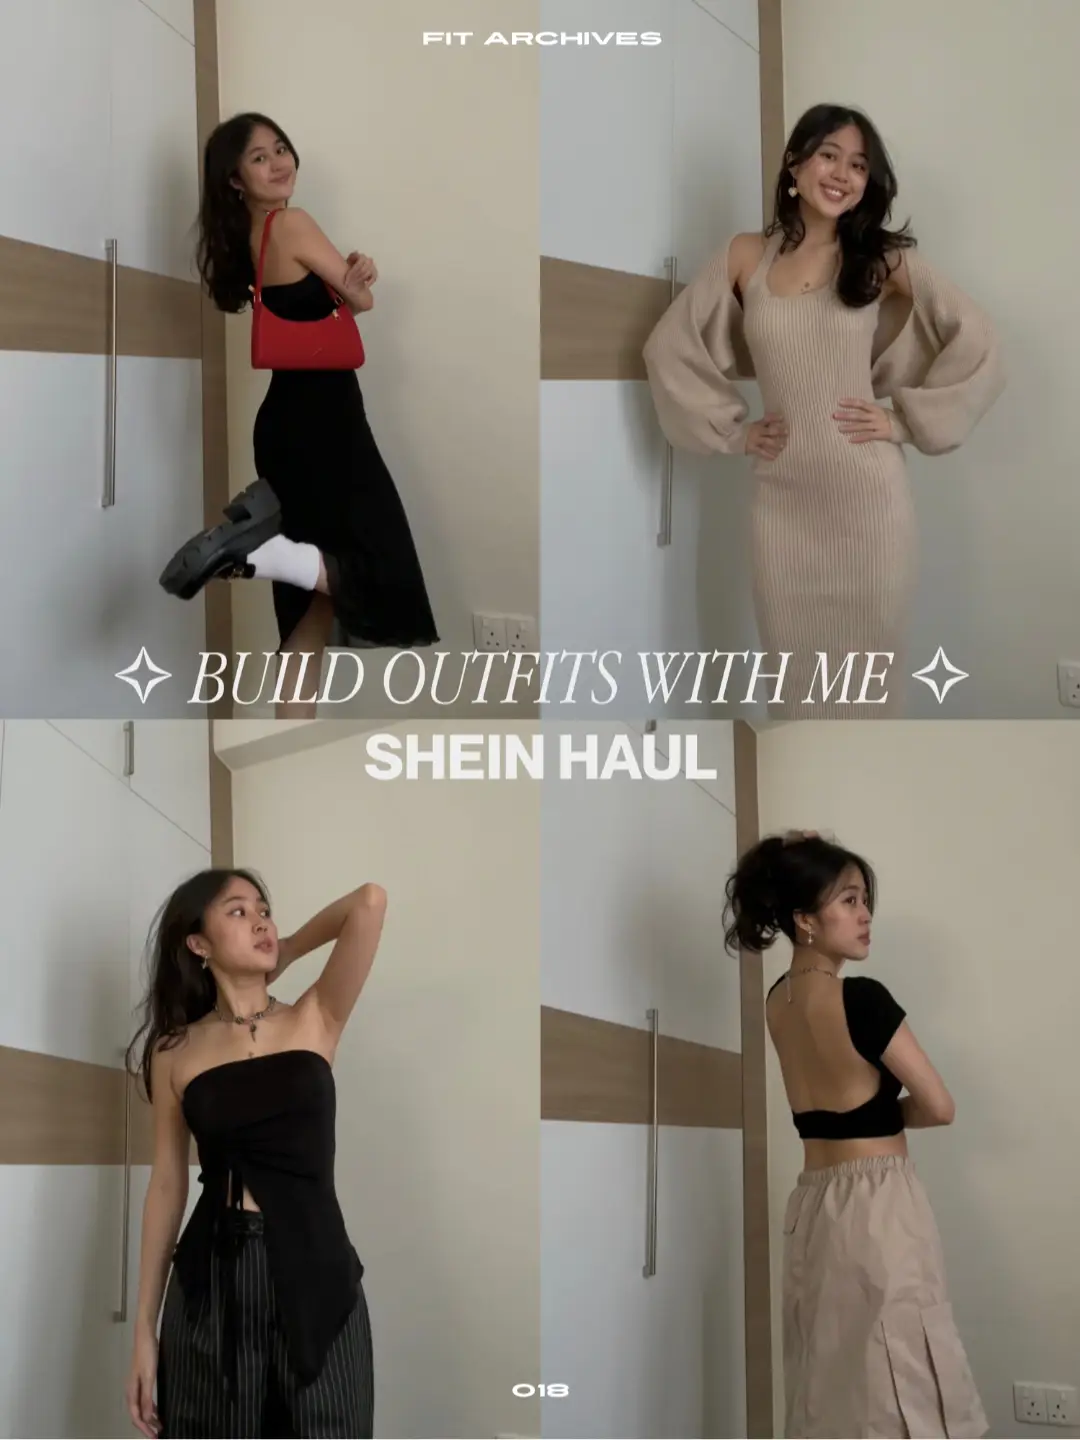 Fit archives, build fits with me ft. shein haul, Video published by mav